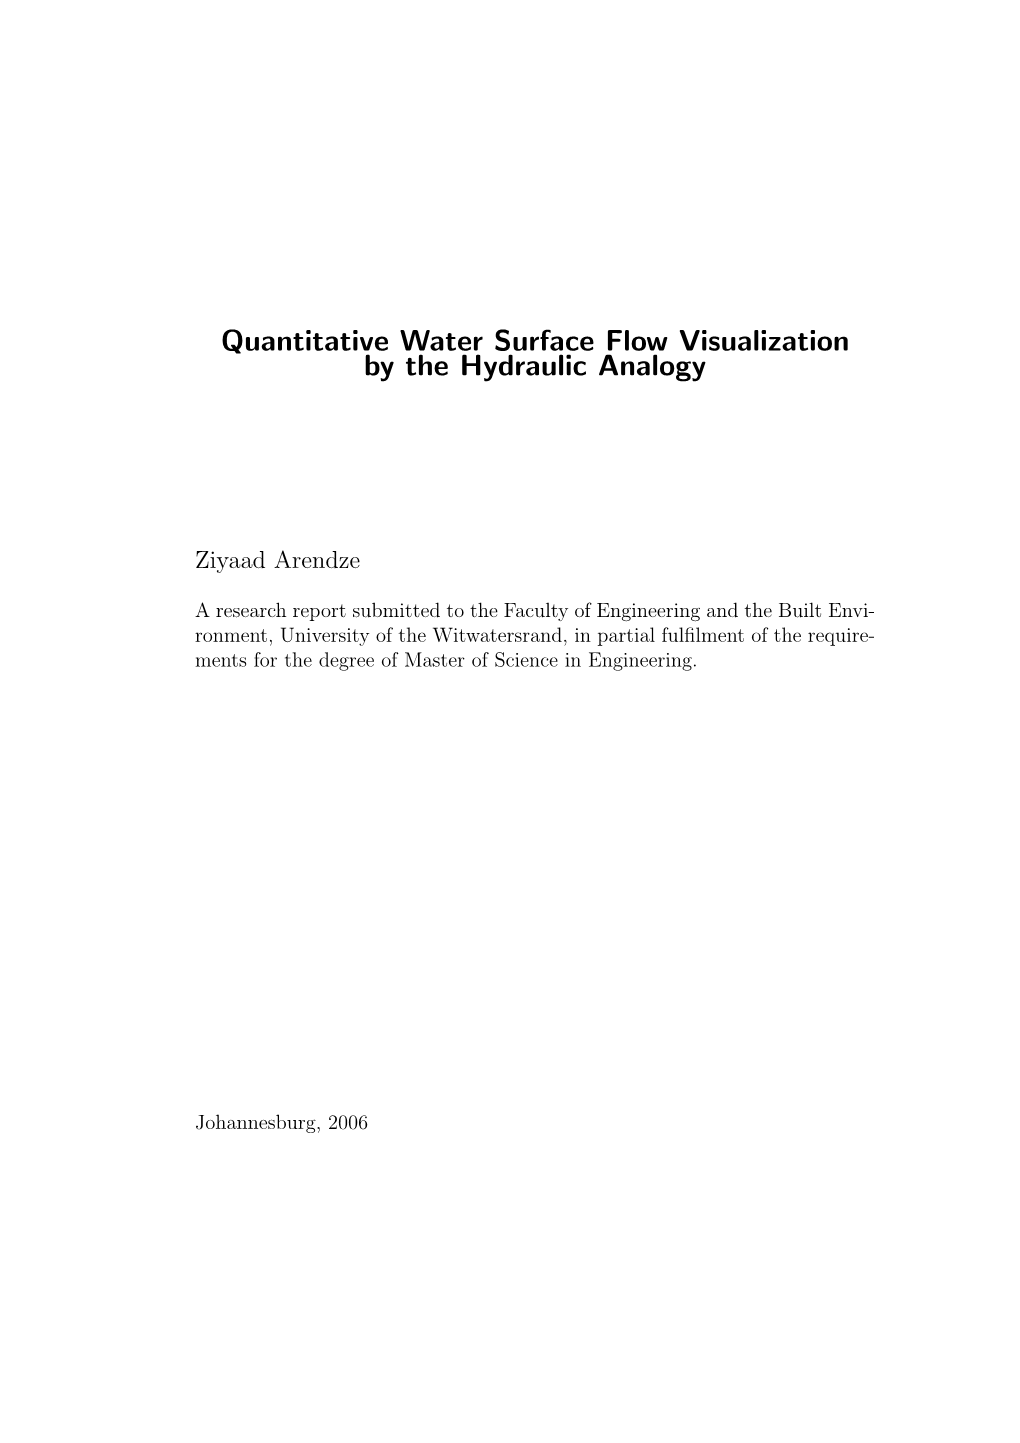 Quantitative Water Surface Flow Visualization by the Hydraulic Analogy